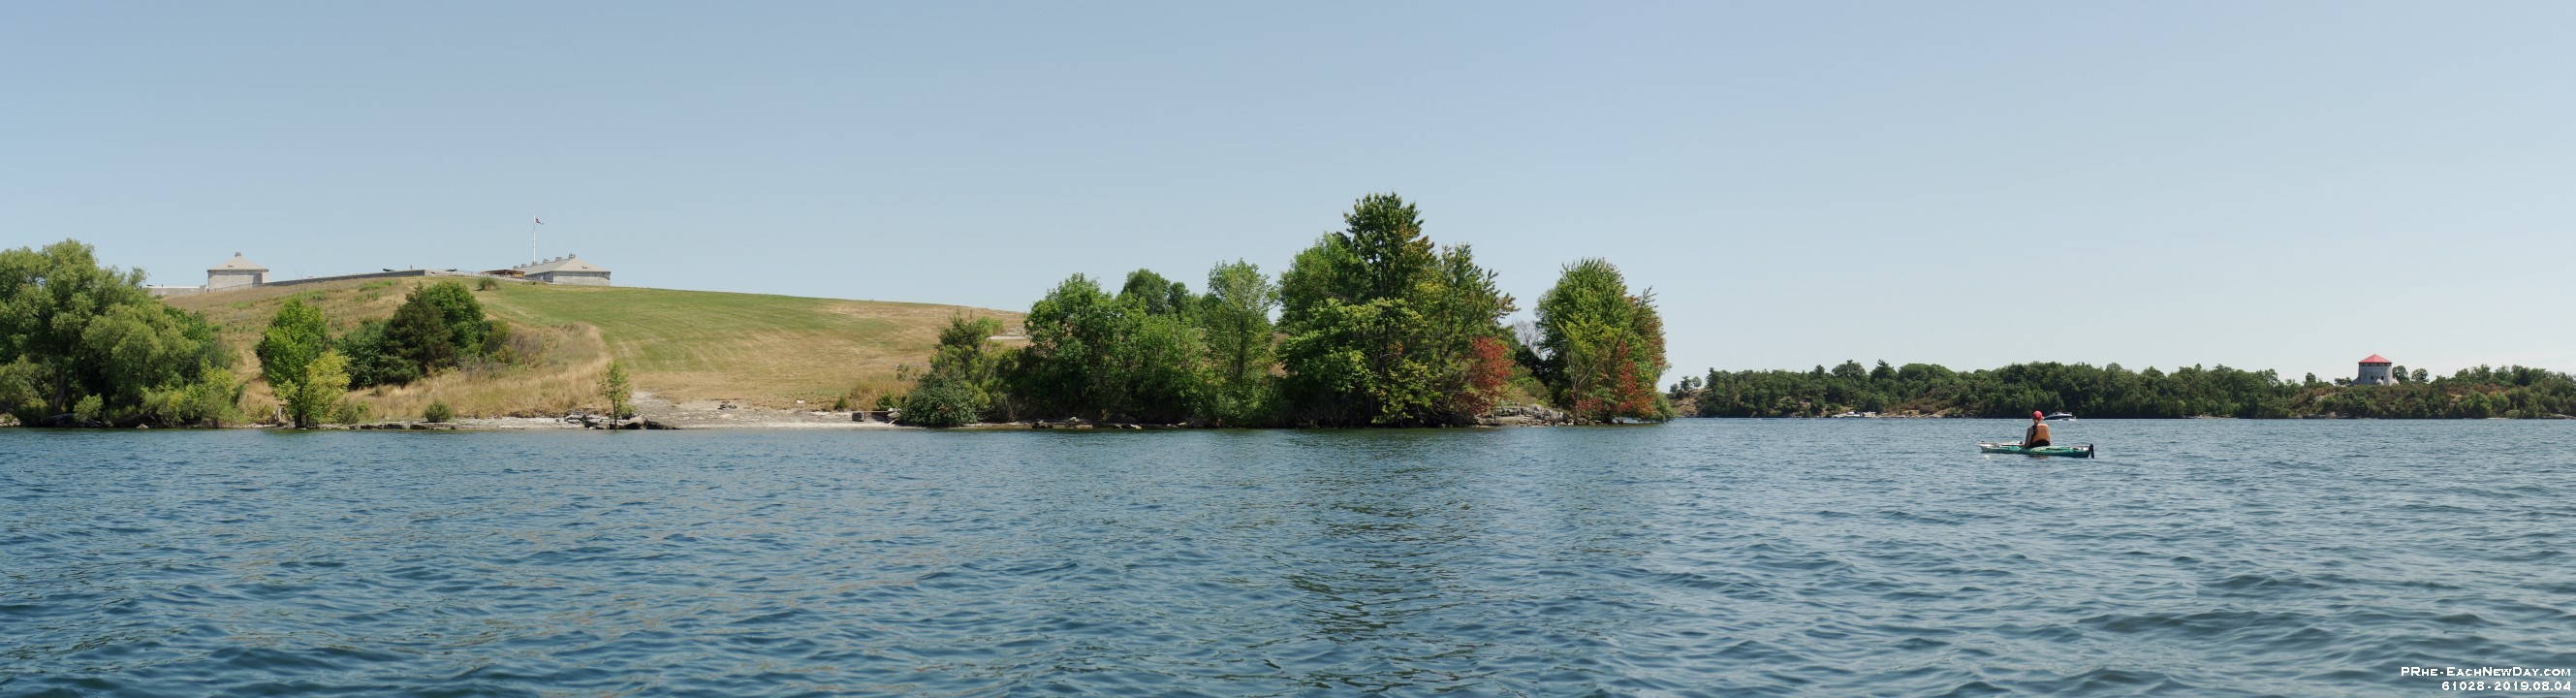 61028PaRoCrLe2 - Gananoque Vacation - Kayaking past Fort Henry to a picnic on Cedar Island